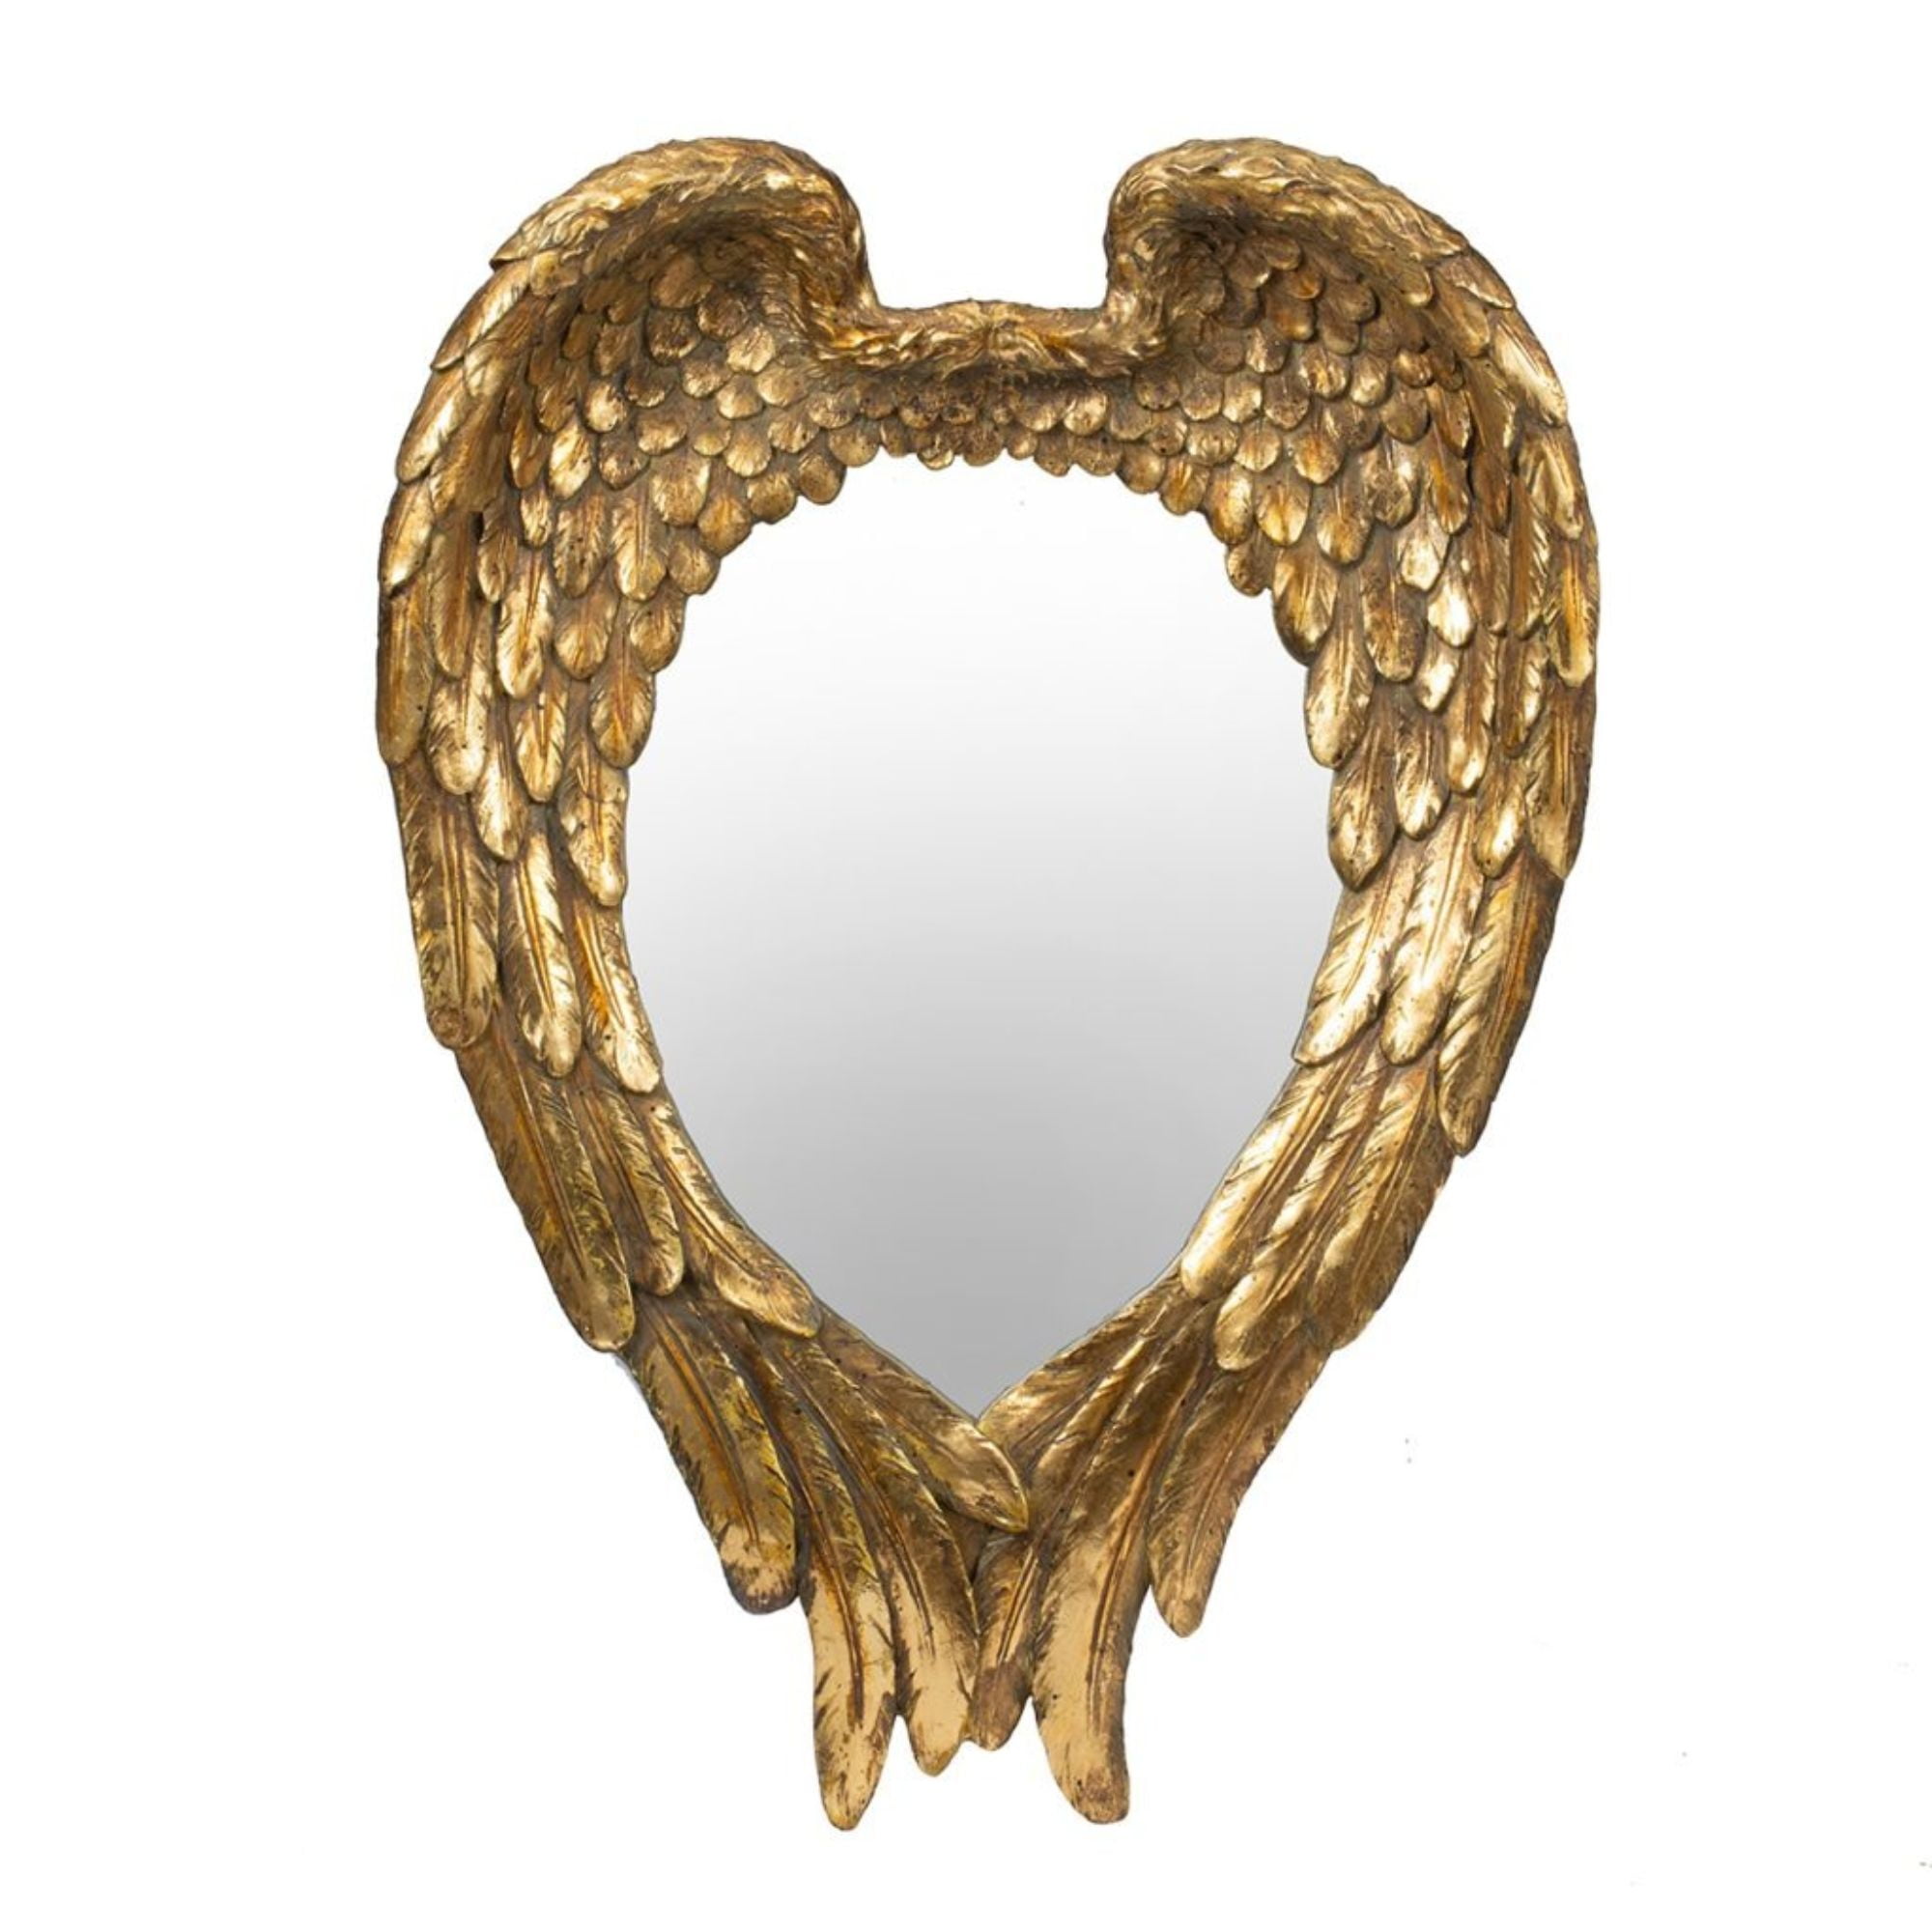 Angel　Vintage　21.75　Wall　Shaped　A＆B　Mirror-　Framed　Wing　Home　Style　Gold　Oval